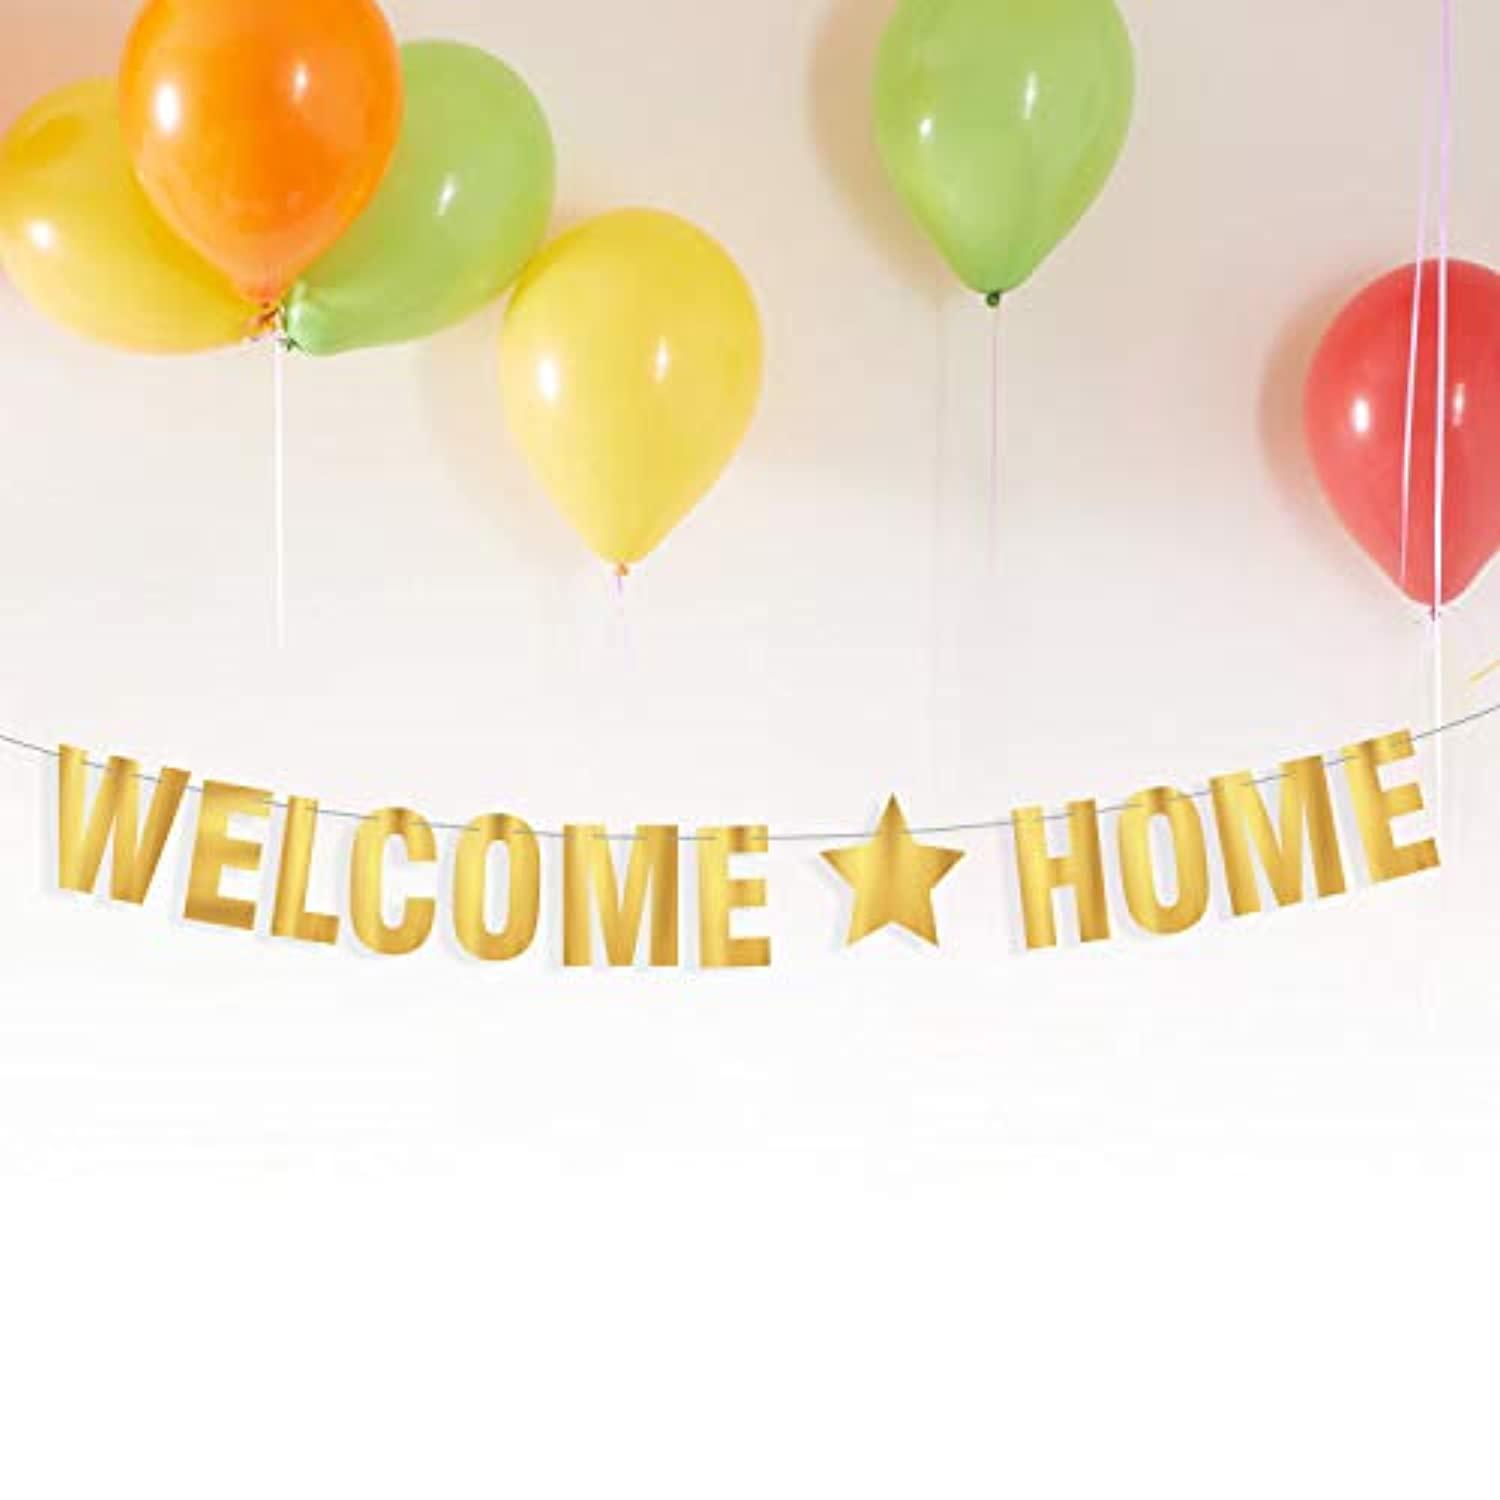 welcome home baby decorations